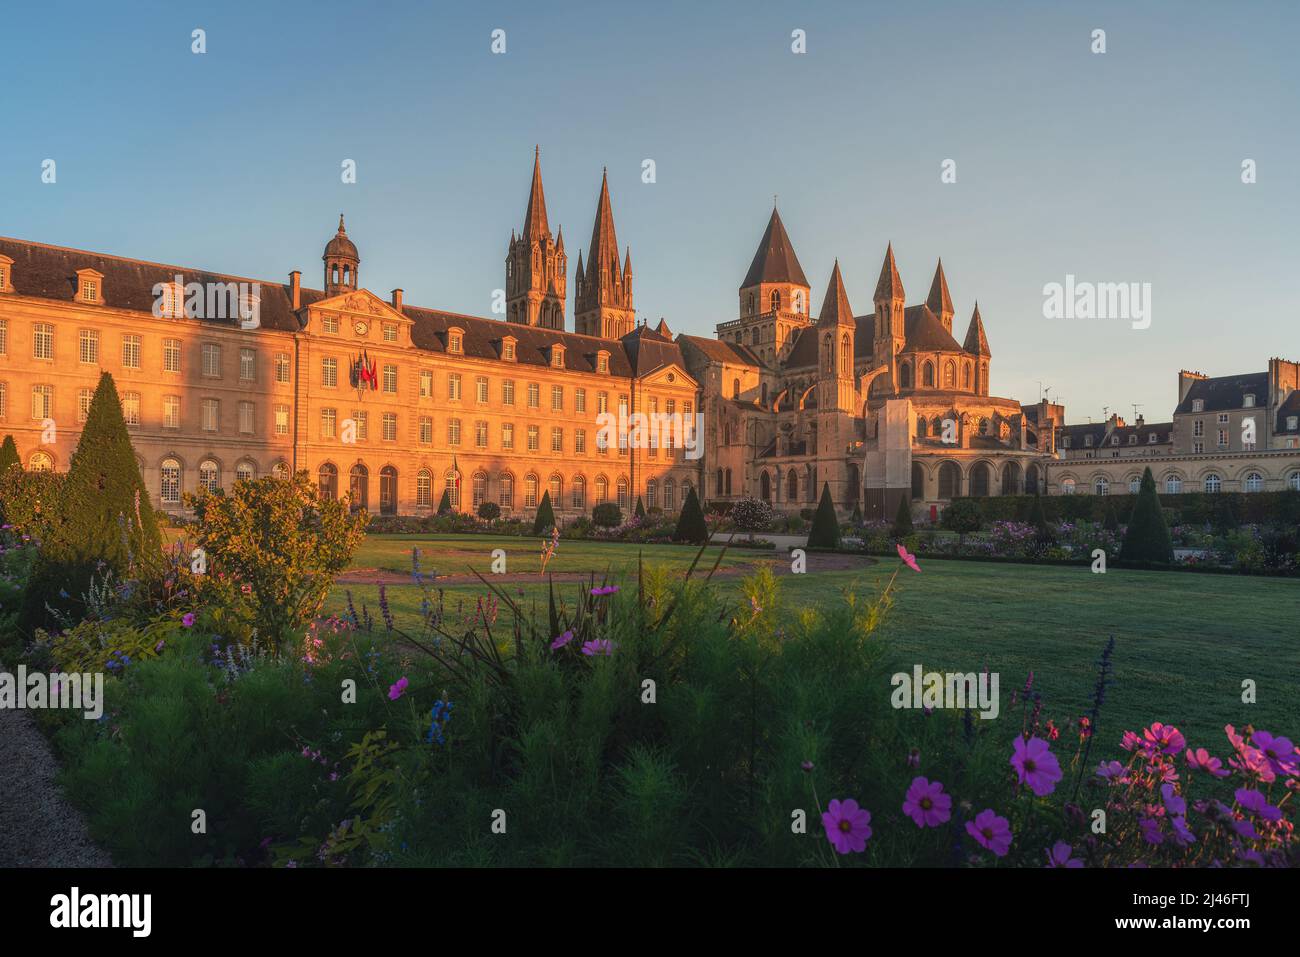 Caen, Normandy, France. Beautiful Abbey of Saint-Etienne or Abbaye aux Hommes and city hall at sunrise. former monastery. Popular tourist destination Stock Photo